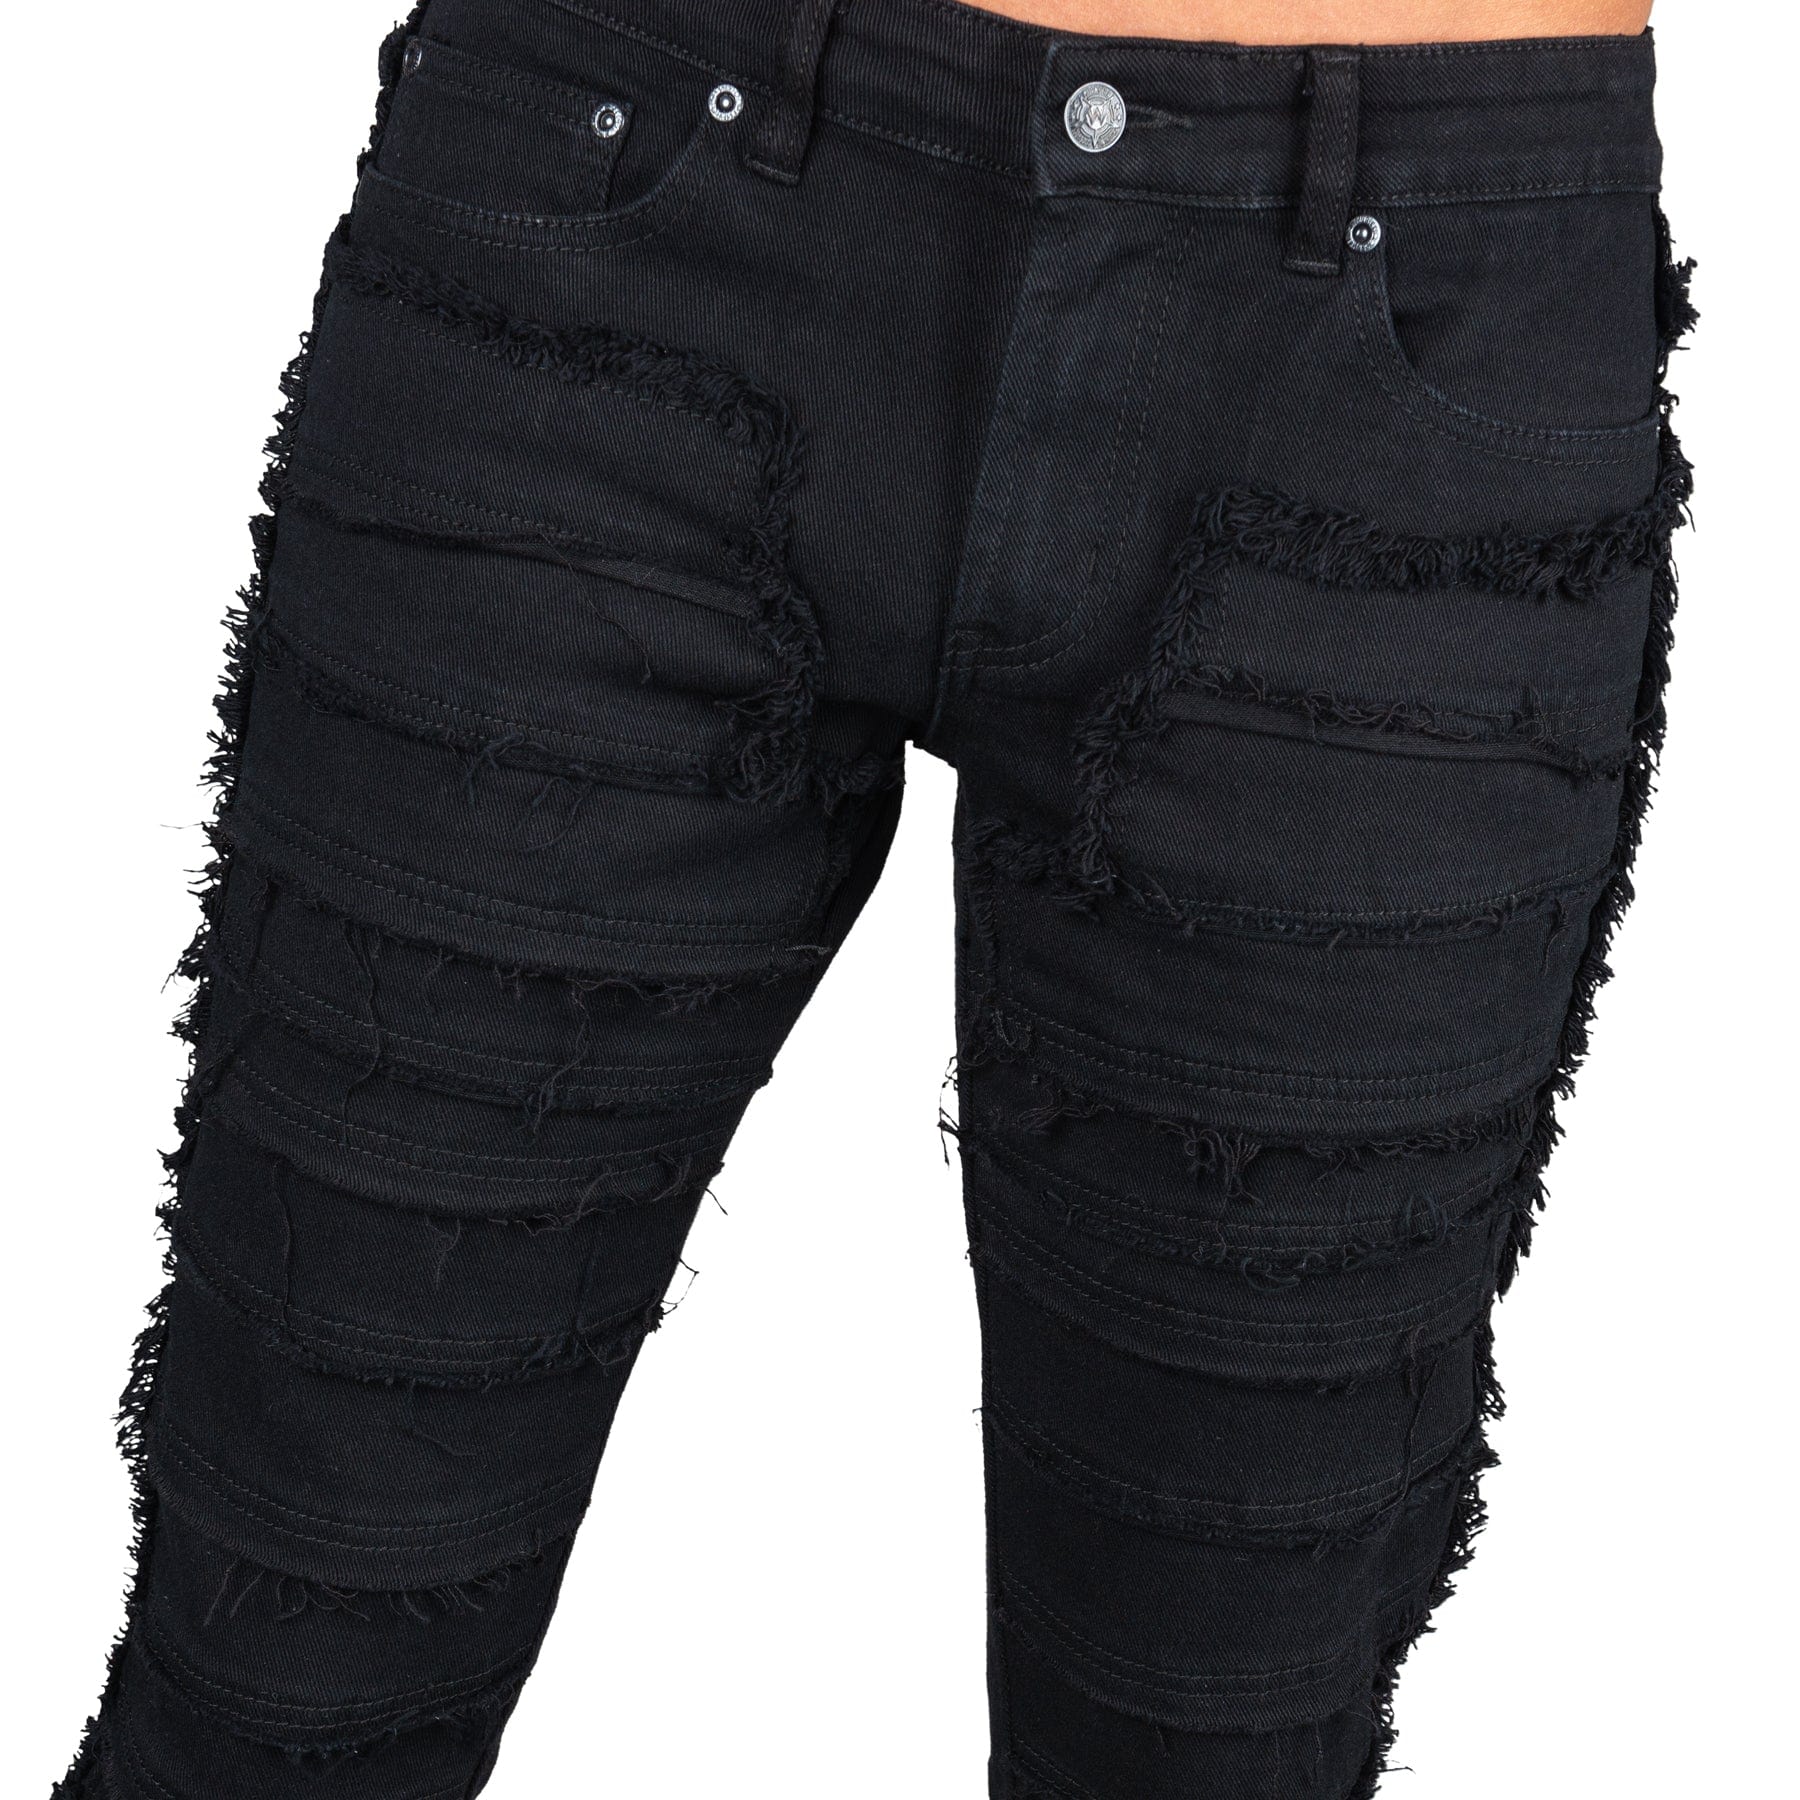 All Access Collection Pants Bandage Jeans - Black